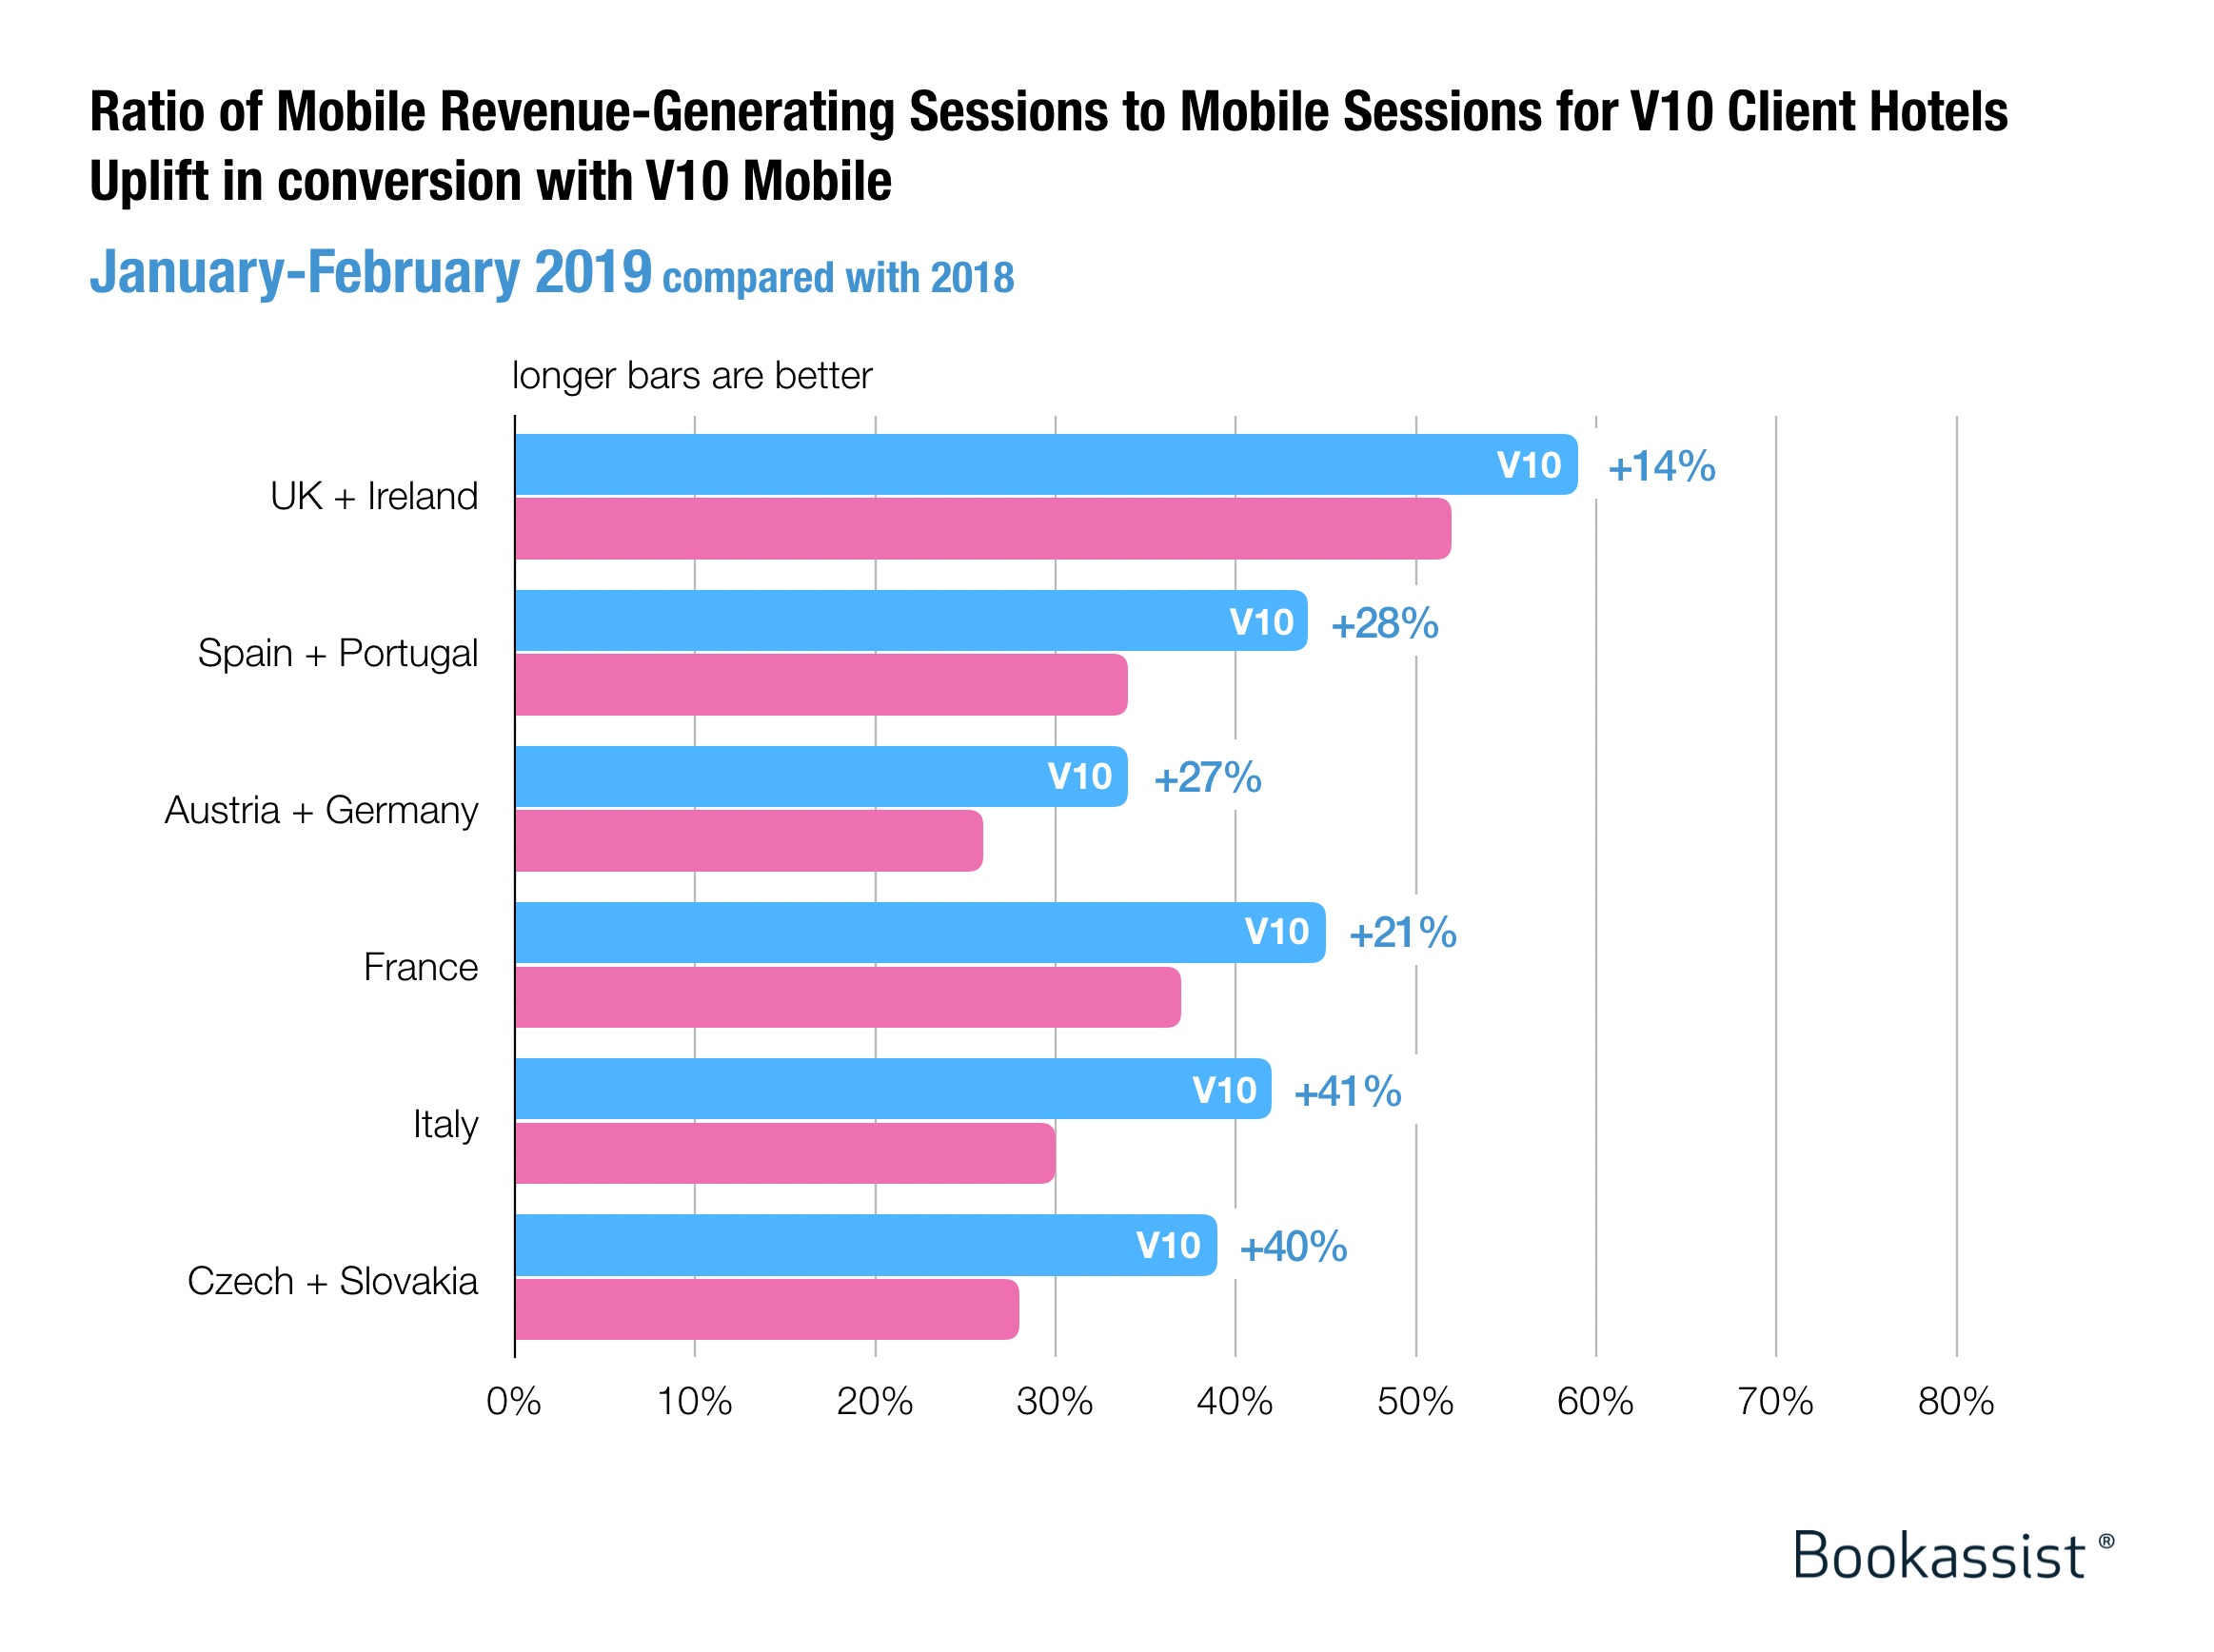 bar chart comparing ratio of revenue generating sessions for mobile and desktop with year on year performance from 2018 to 2019